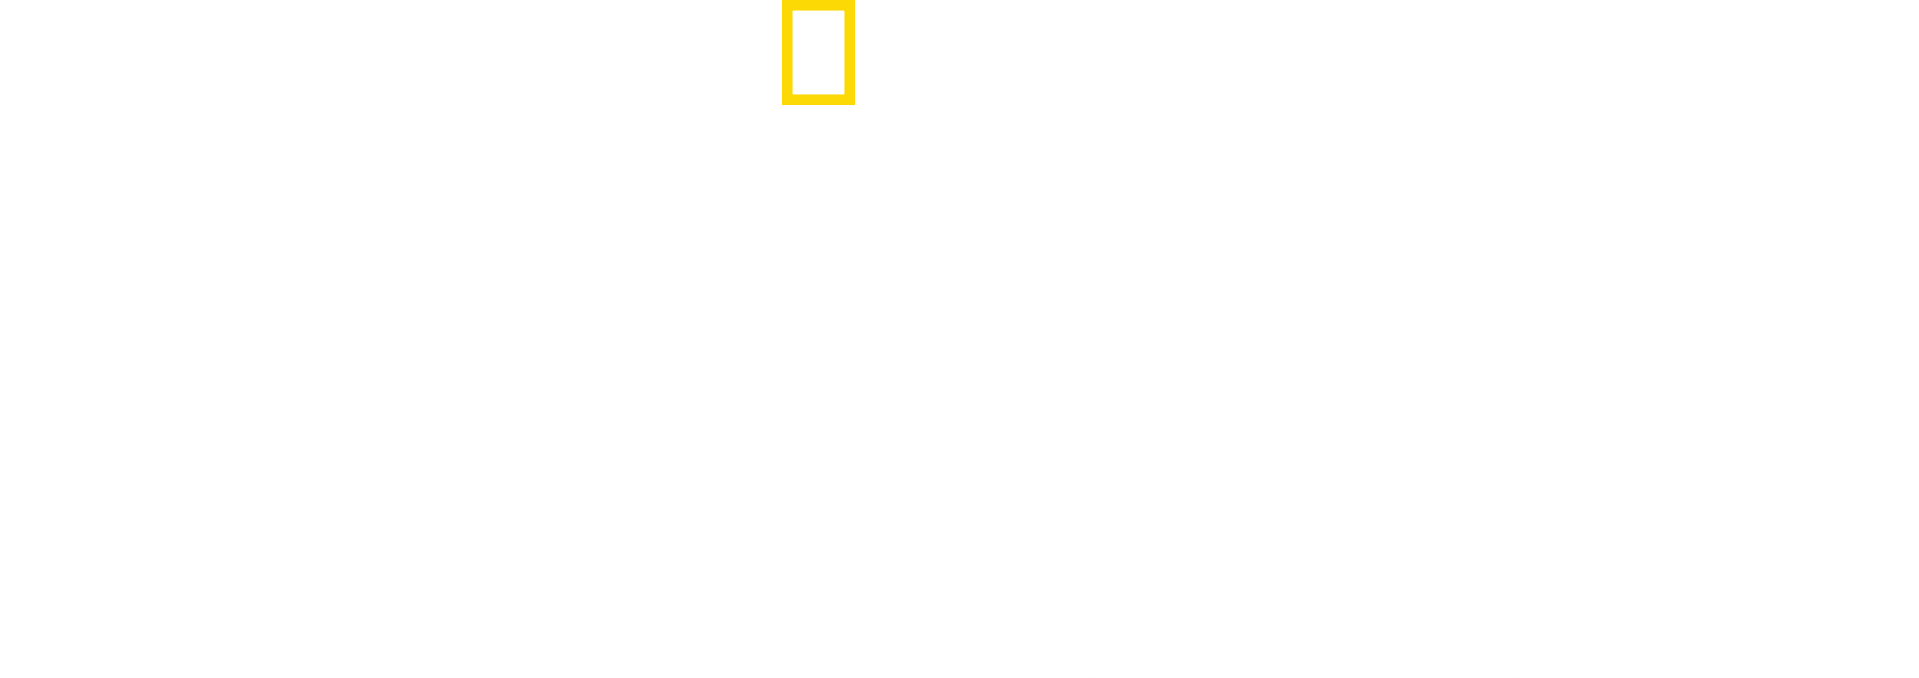 National Geographic Presents: IMPACT with Gal Gadot logo